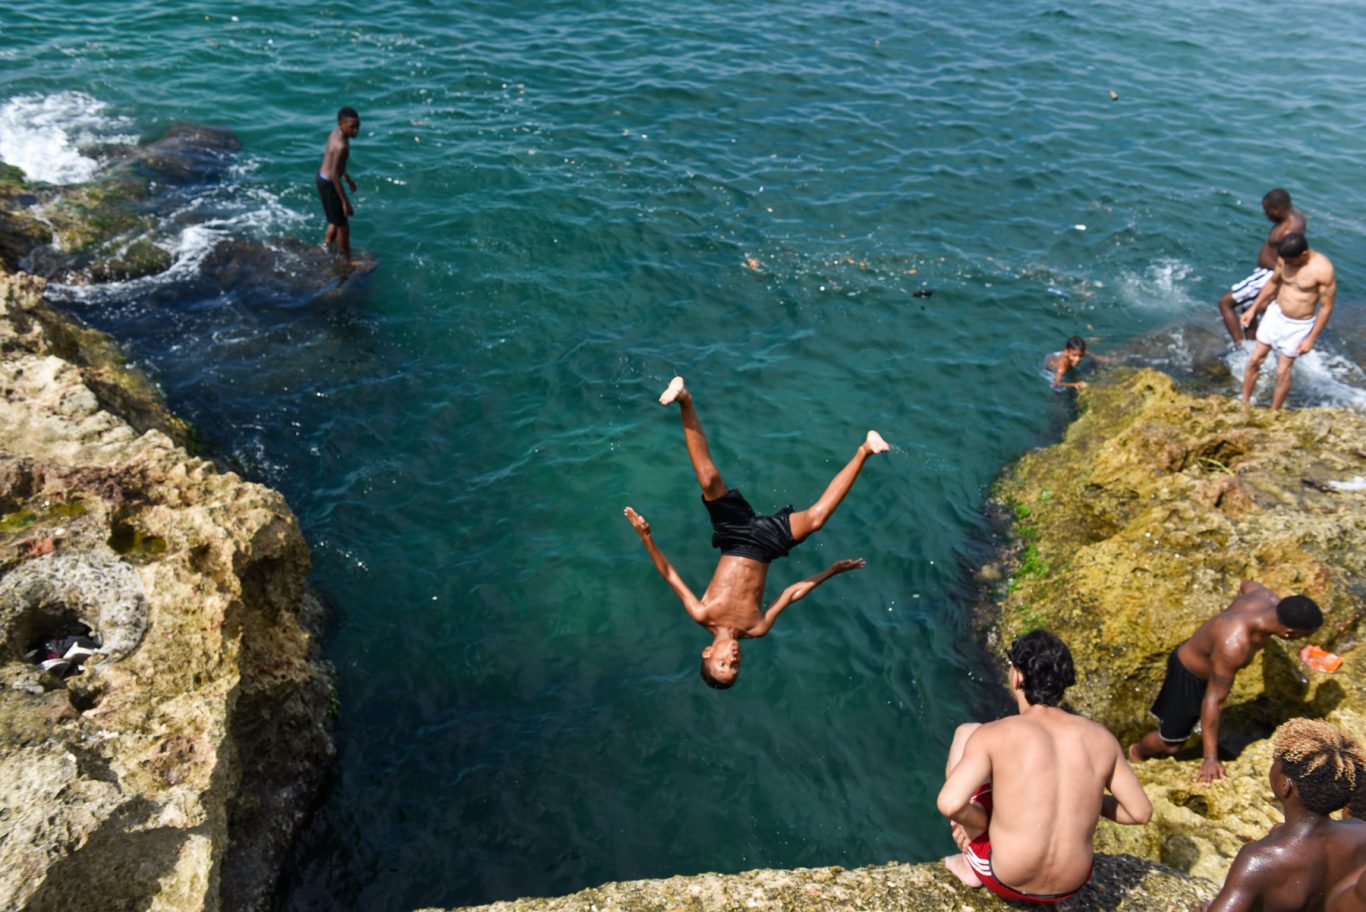 Teenagers jumping into the sea from the wall on the famous Havana avenue. Photo: Kaloian.